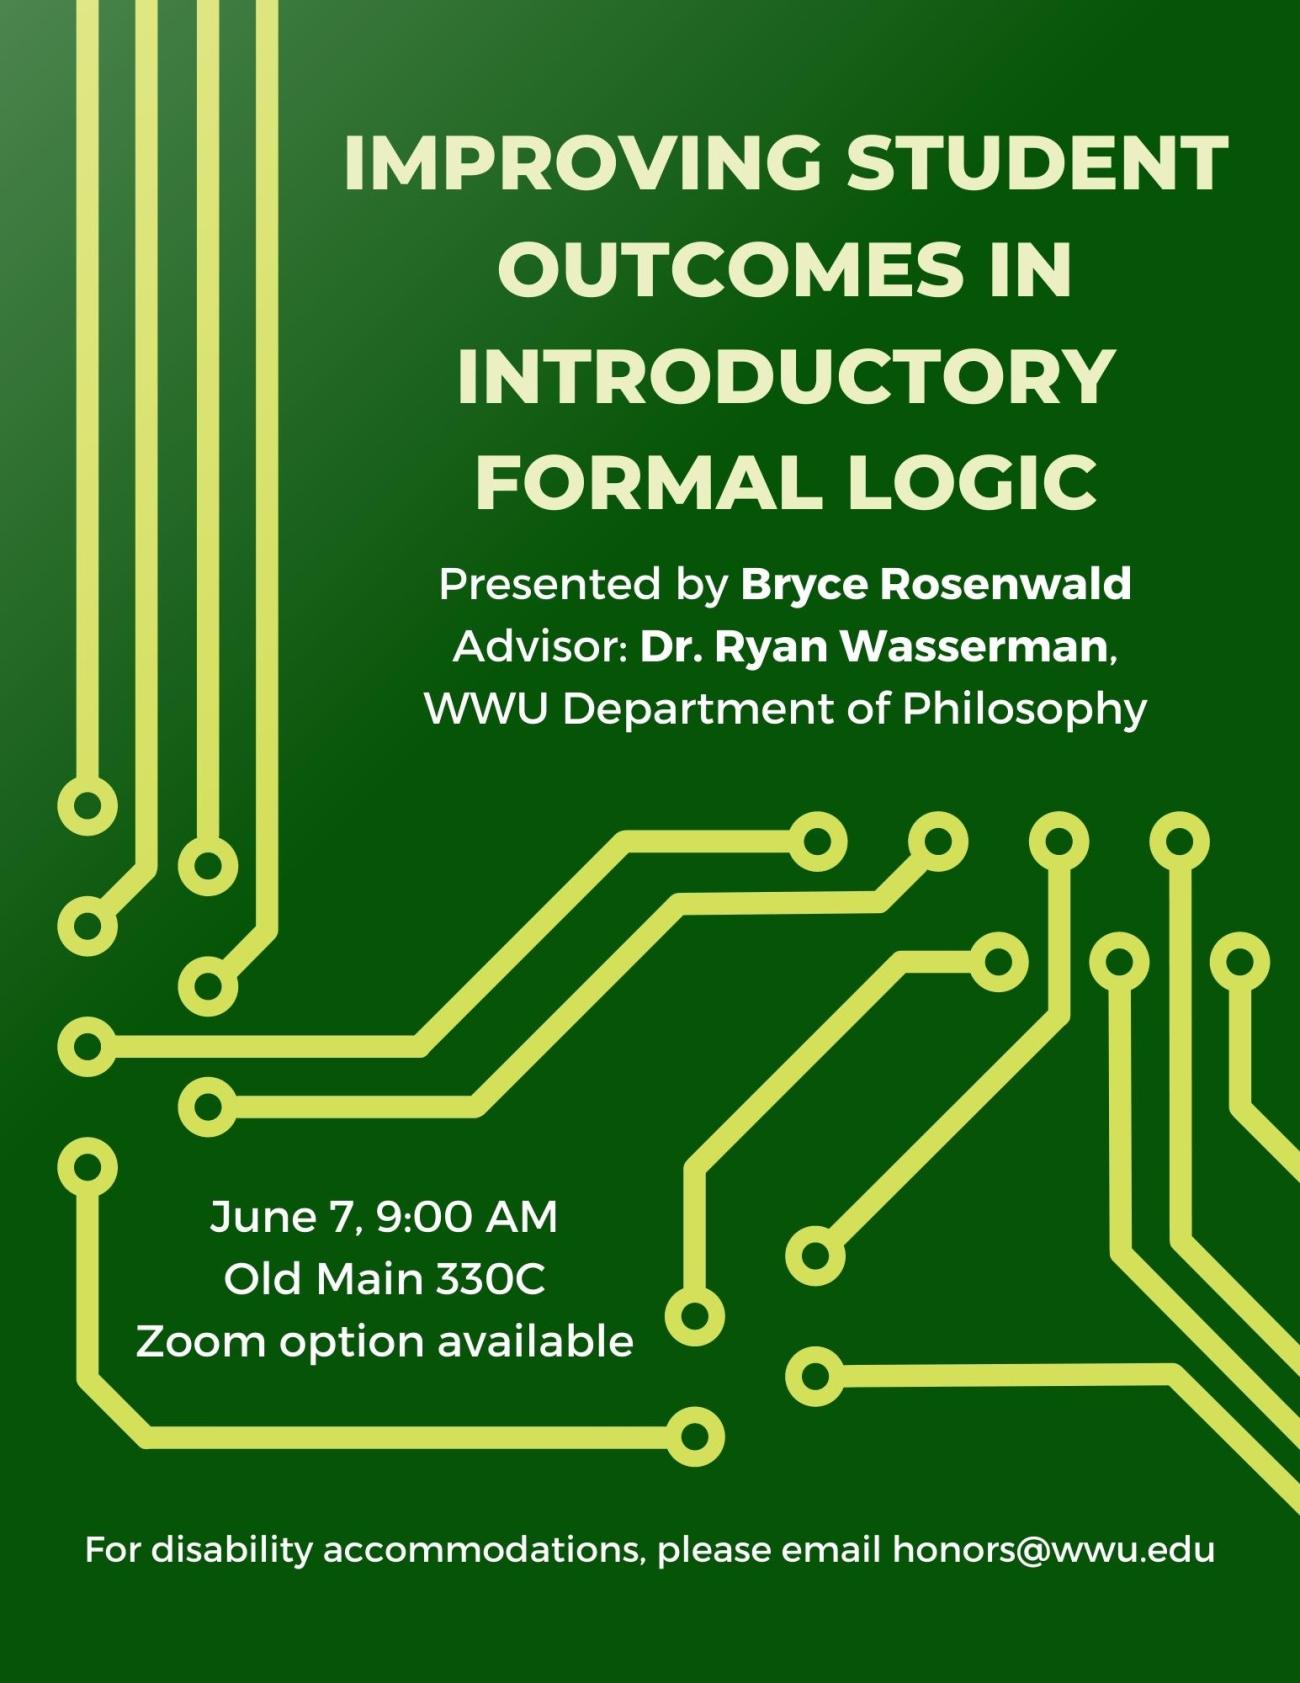 A green poster with a circuit-board motif.  The text reads: “Improving student outcomes in introductory formal logic. Presented by Bryce Rosenwald. Advisor: Dr. Ryan Wasserman, WWU Department of Philosophy. June 7, 9:00 AM. Old Main 330C. Zoom option available. For disability accommodations, please email honors@wwu.edu.”